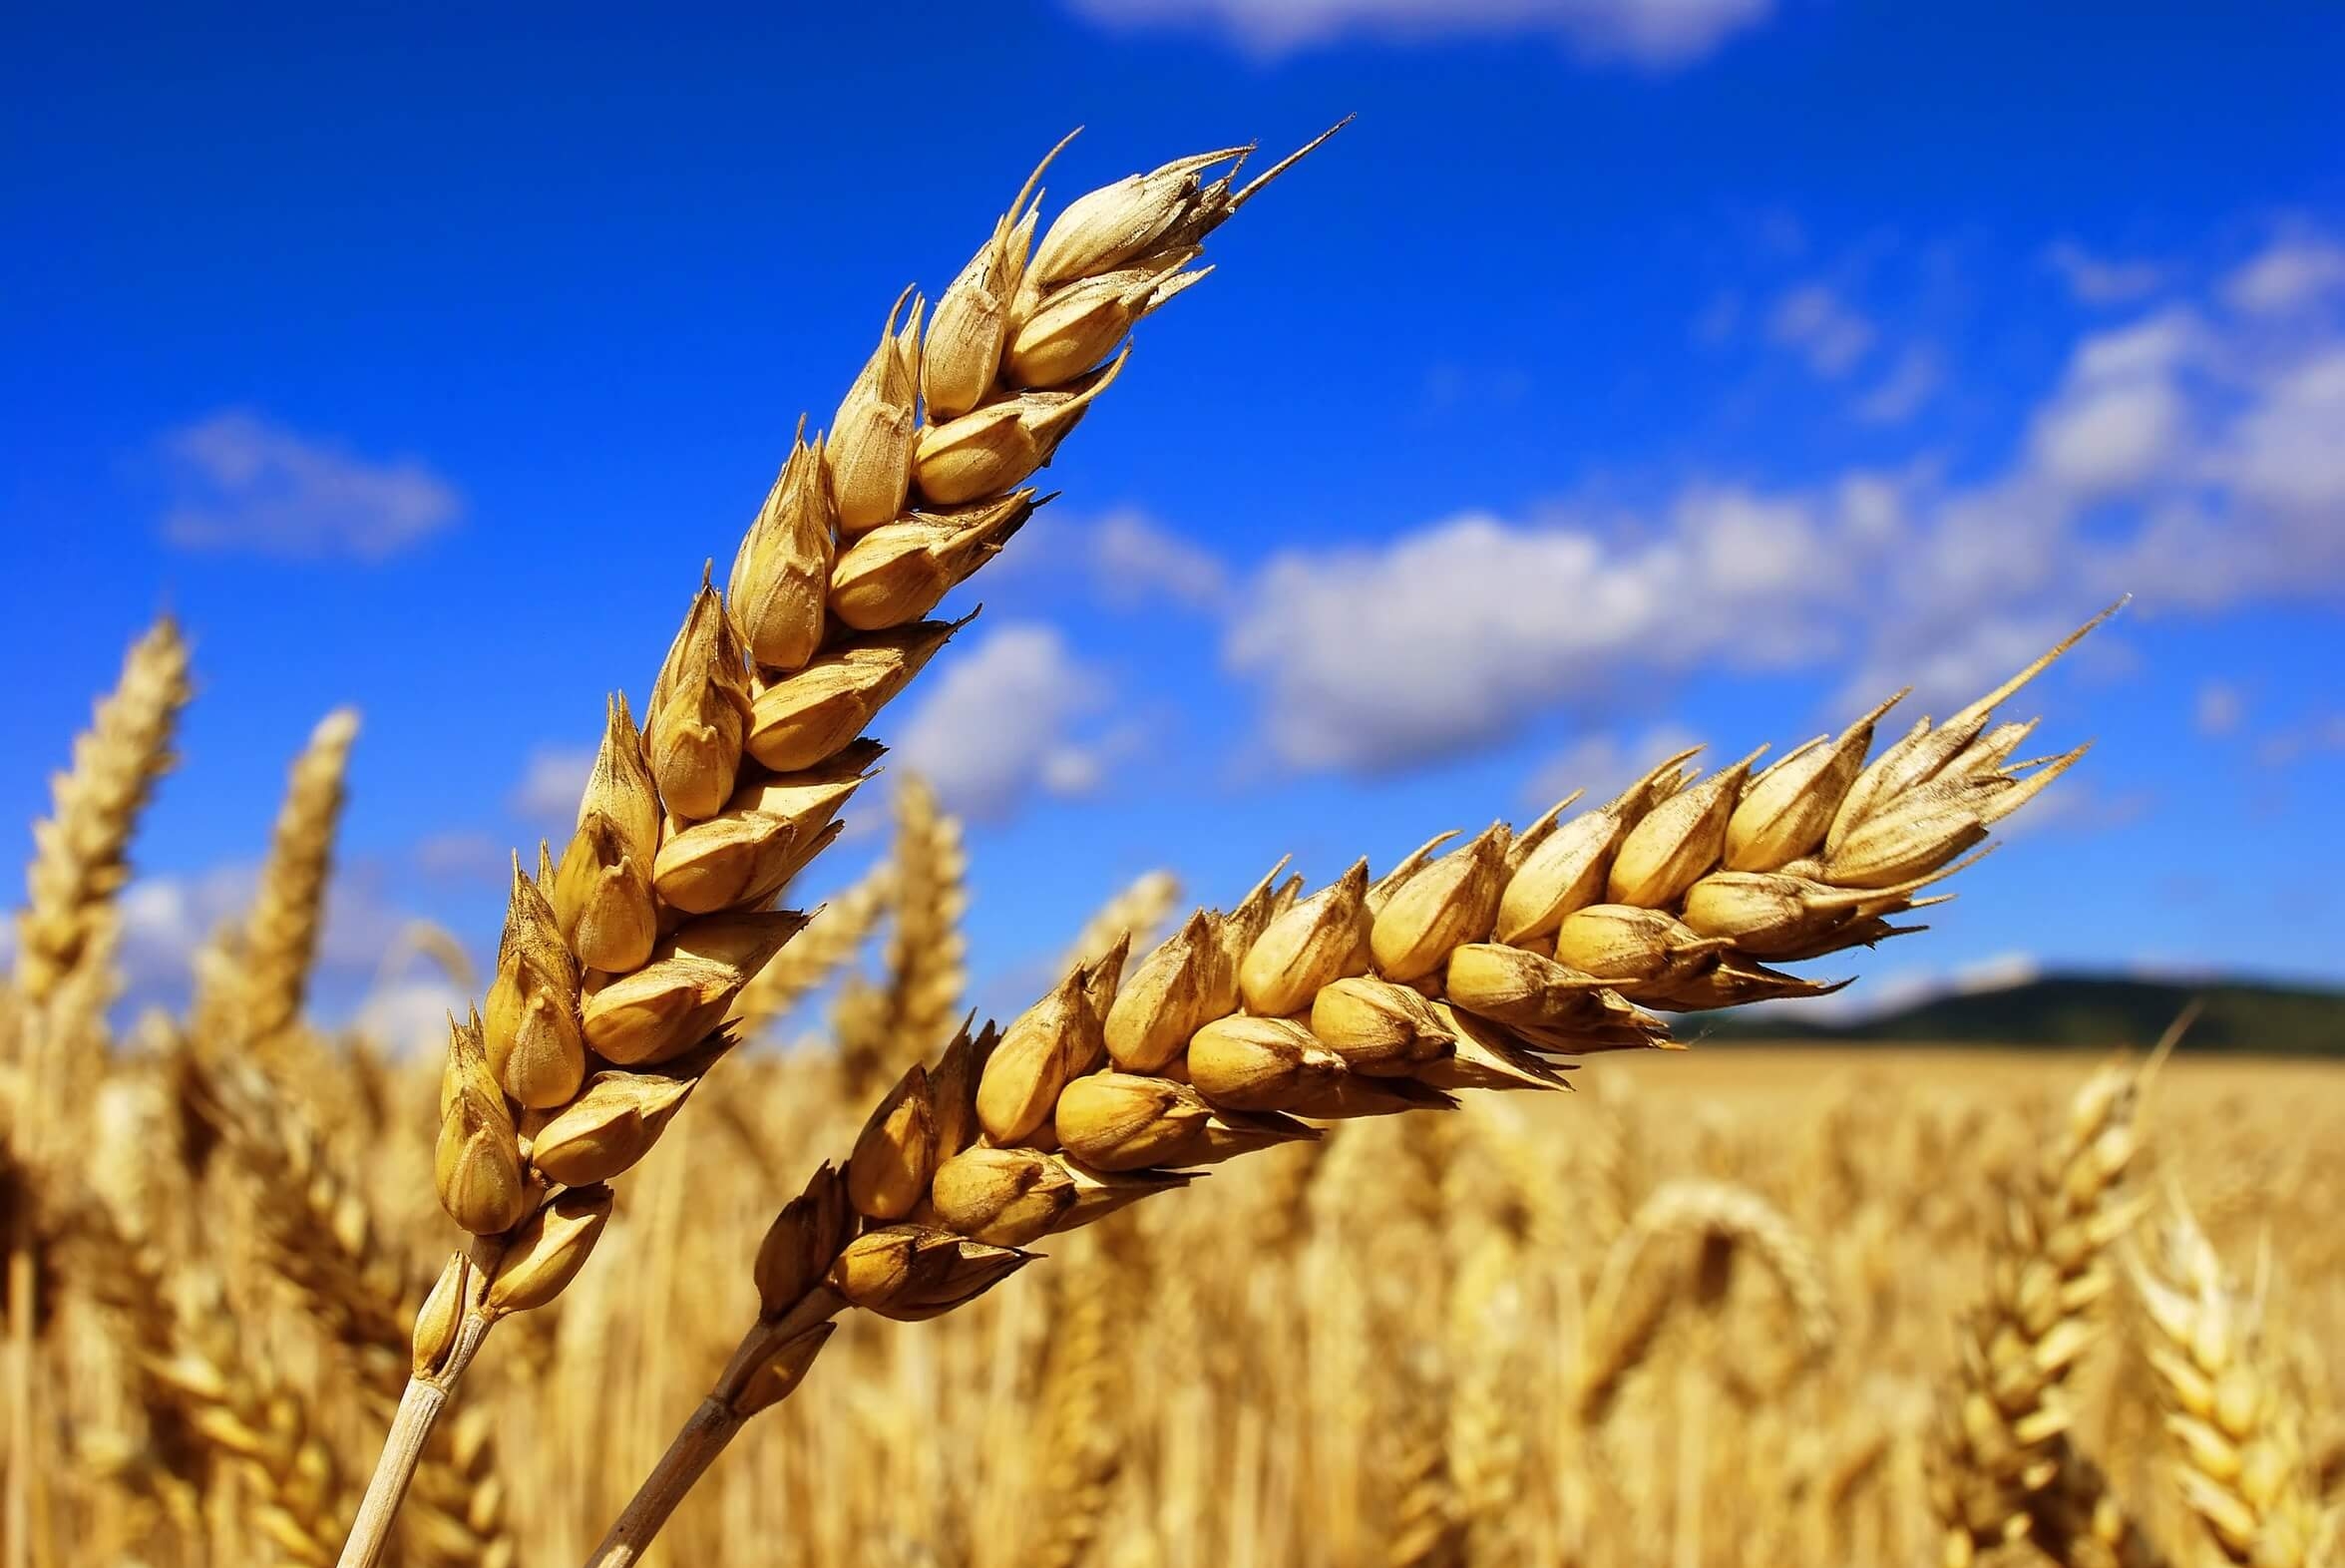 The decline in demand increases the pressure on wheat prices